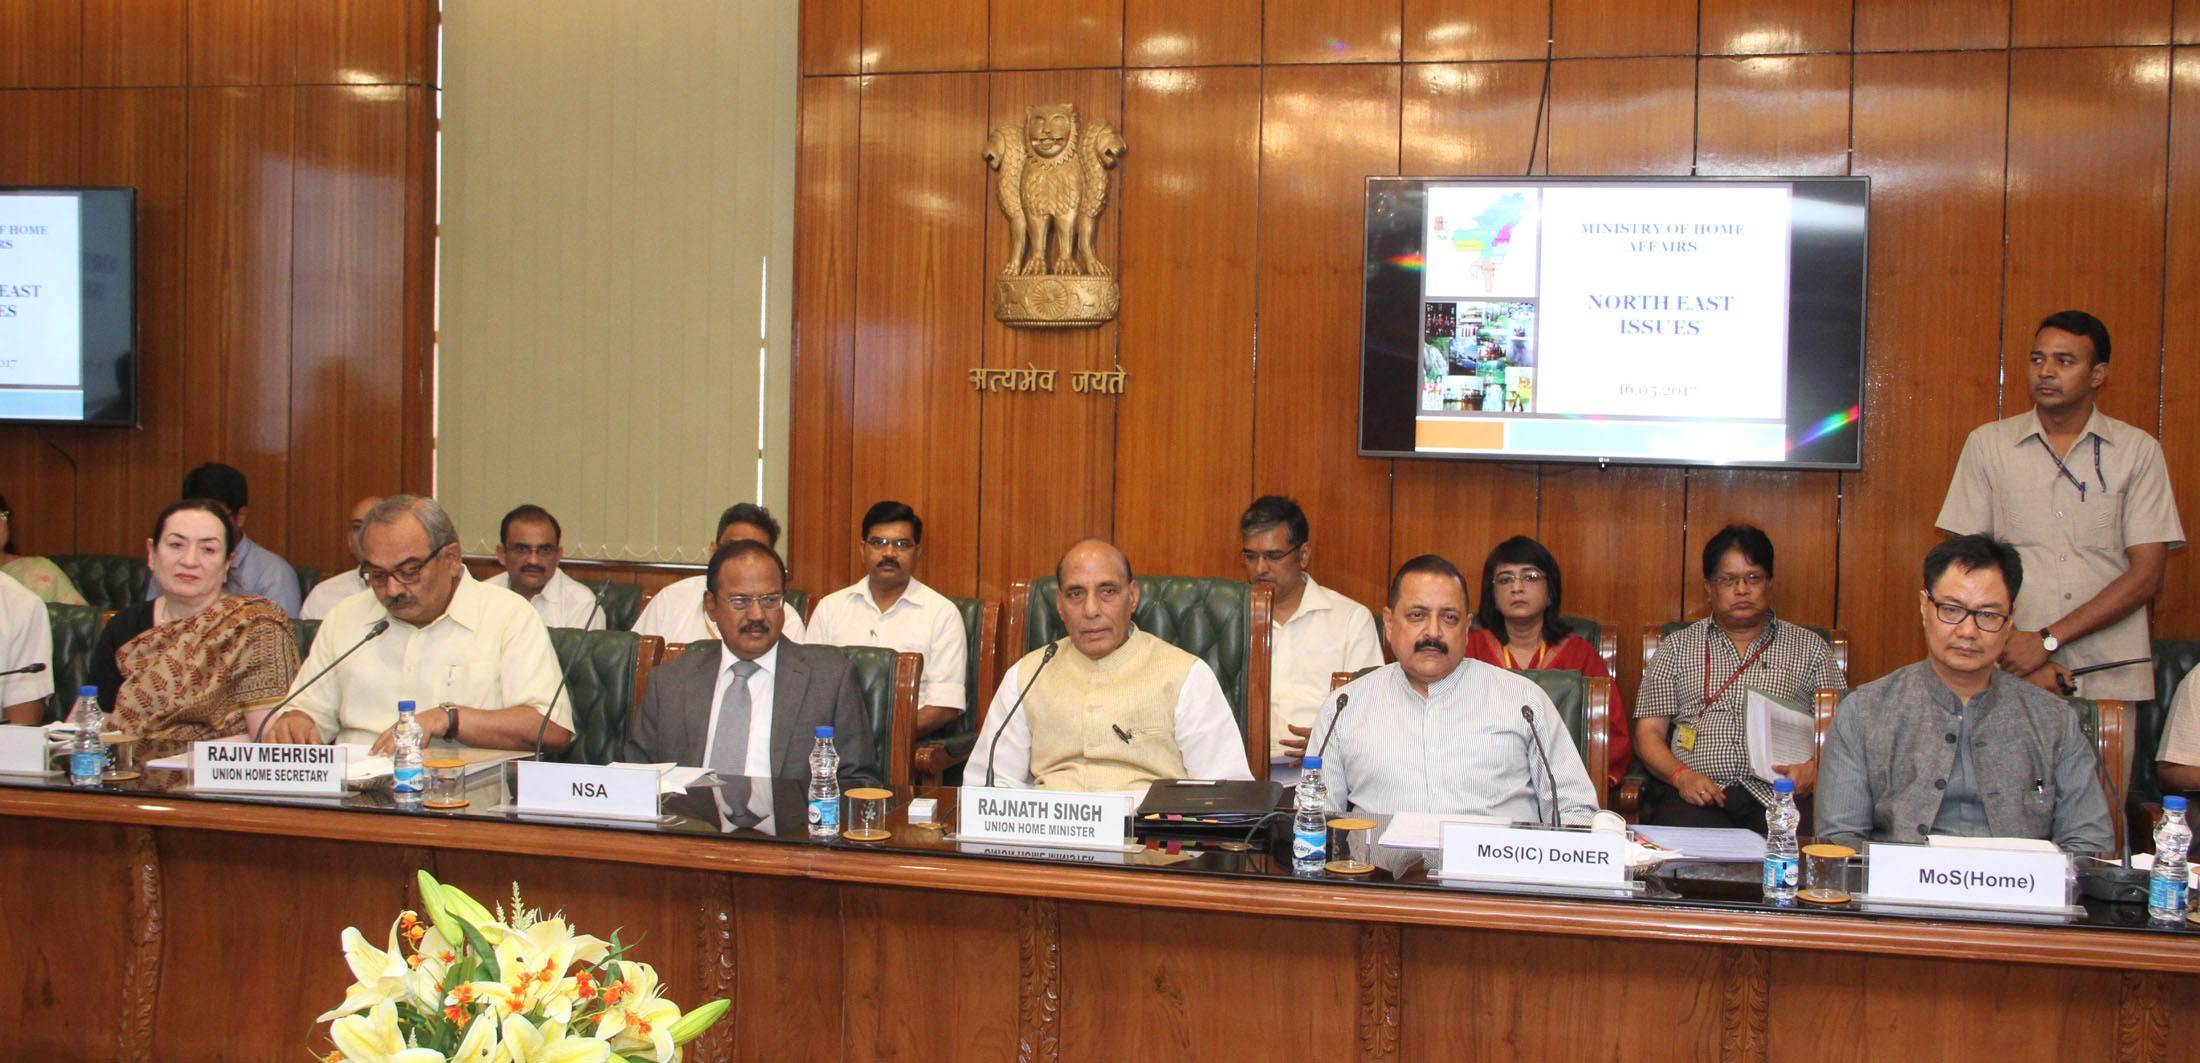 The Union Home Minister, Shri Rajnath Singh chairing the meeting on issues related to North East, in New Delhi on May 16, 2017.  The Minister of State for Development of North Eastern Region (I/C), Prime Ministers Office, Personnel, Public Grievances & Pensions, Atomic Energy and Space, Dr. Jitendra Singh, the Minister of State for Home Affairs, Shri Kiren Rijiju and the National Security Advisor, Shri Ajit Doval and other senior officers are also seen.